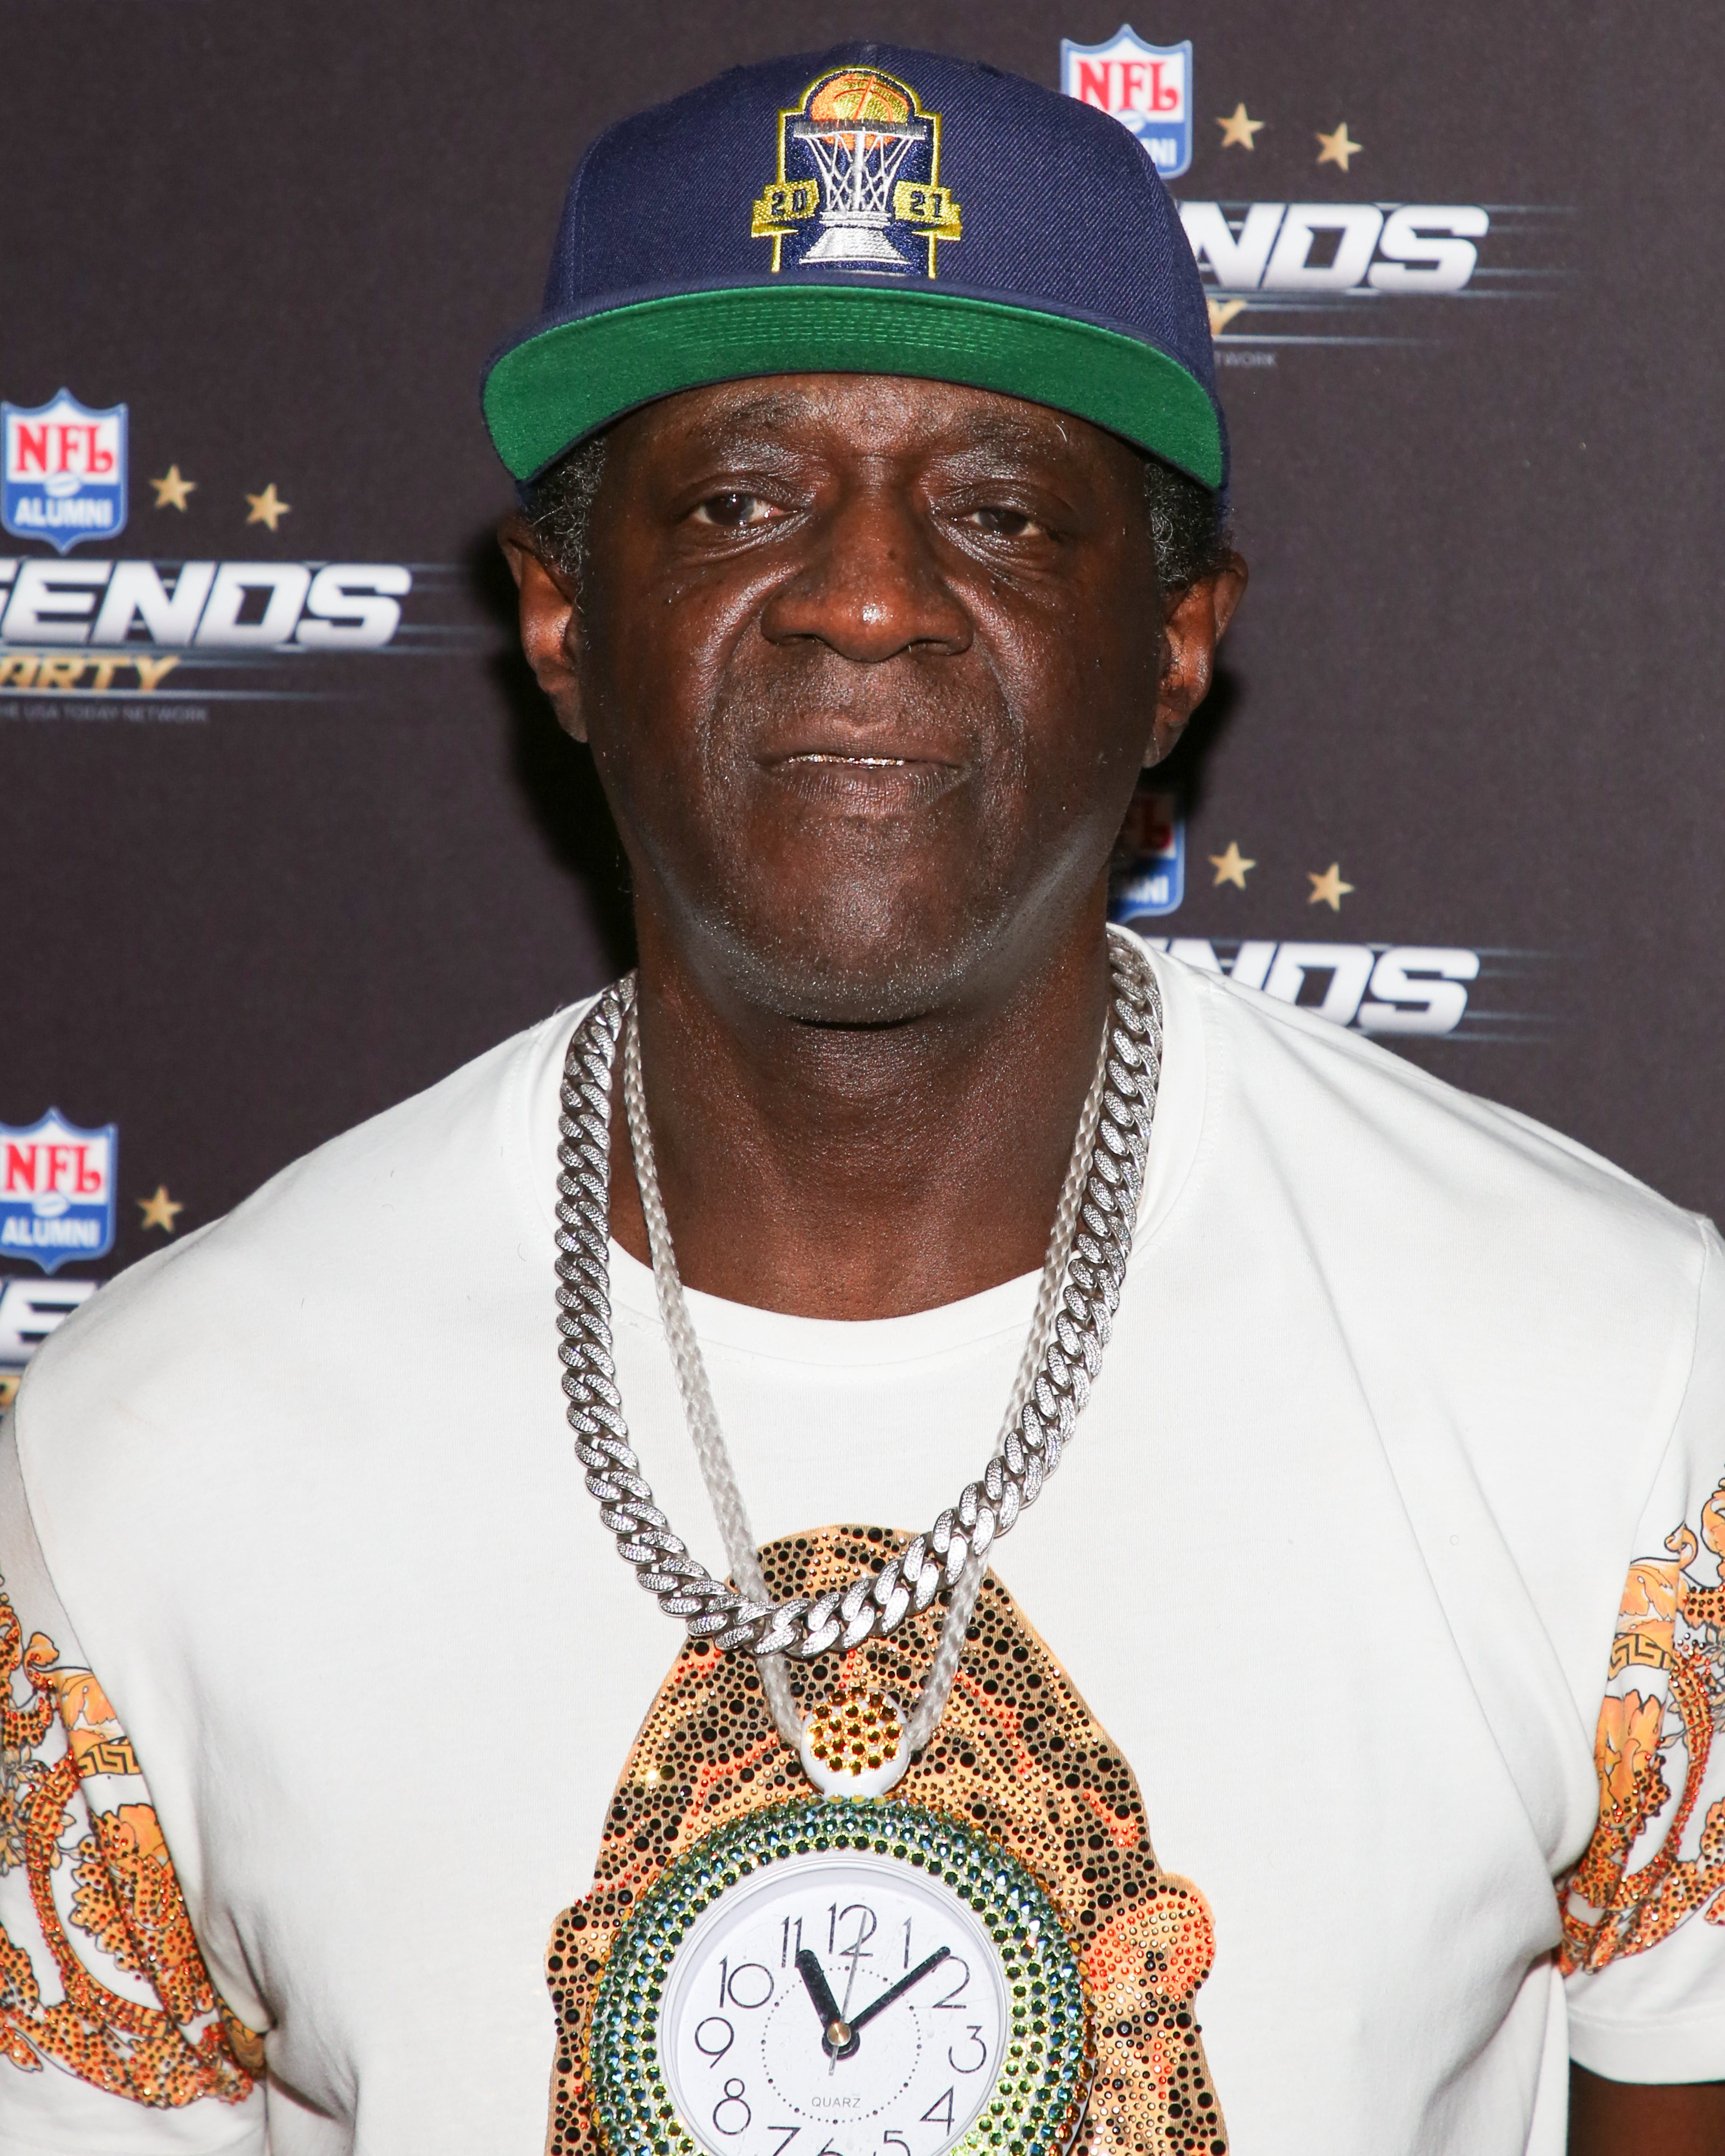 Flavor Flav at the 2022 NFL Alumni Legends party in Los Angeles on February 11, 2022 | Source: Getty Images